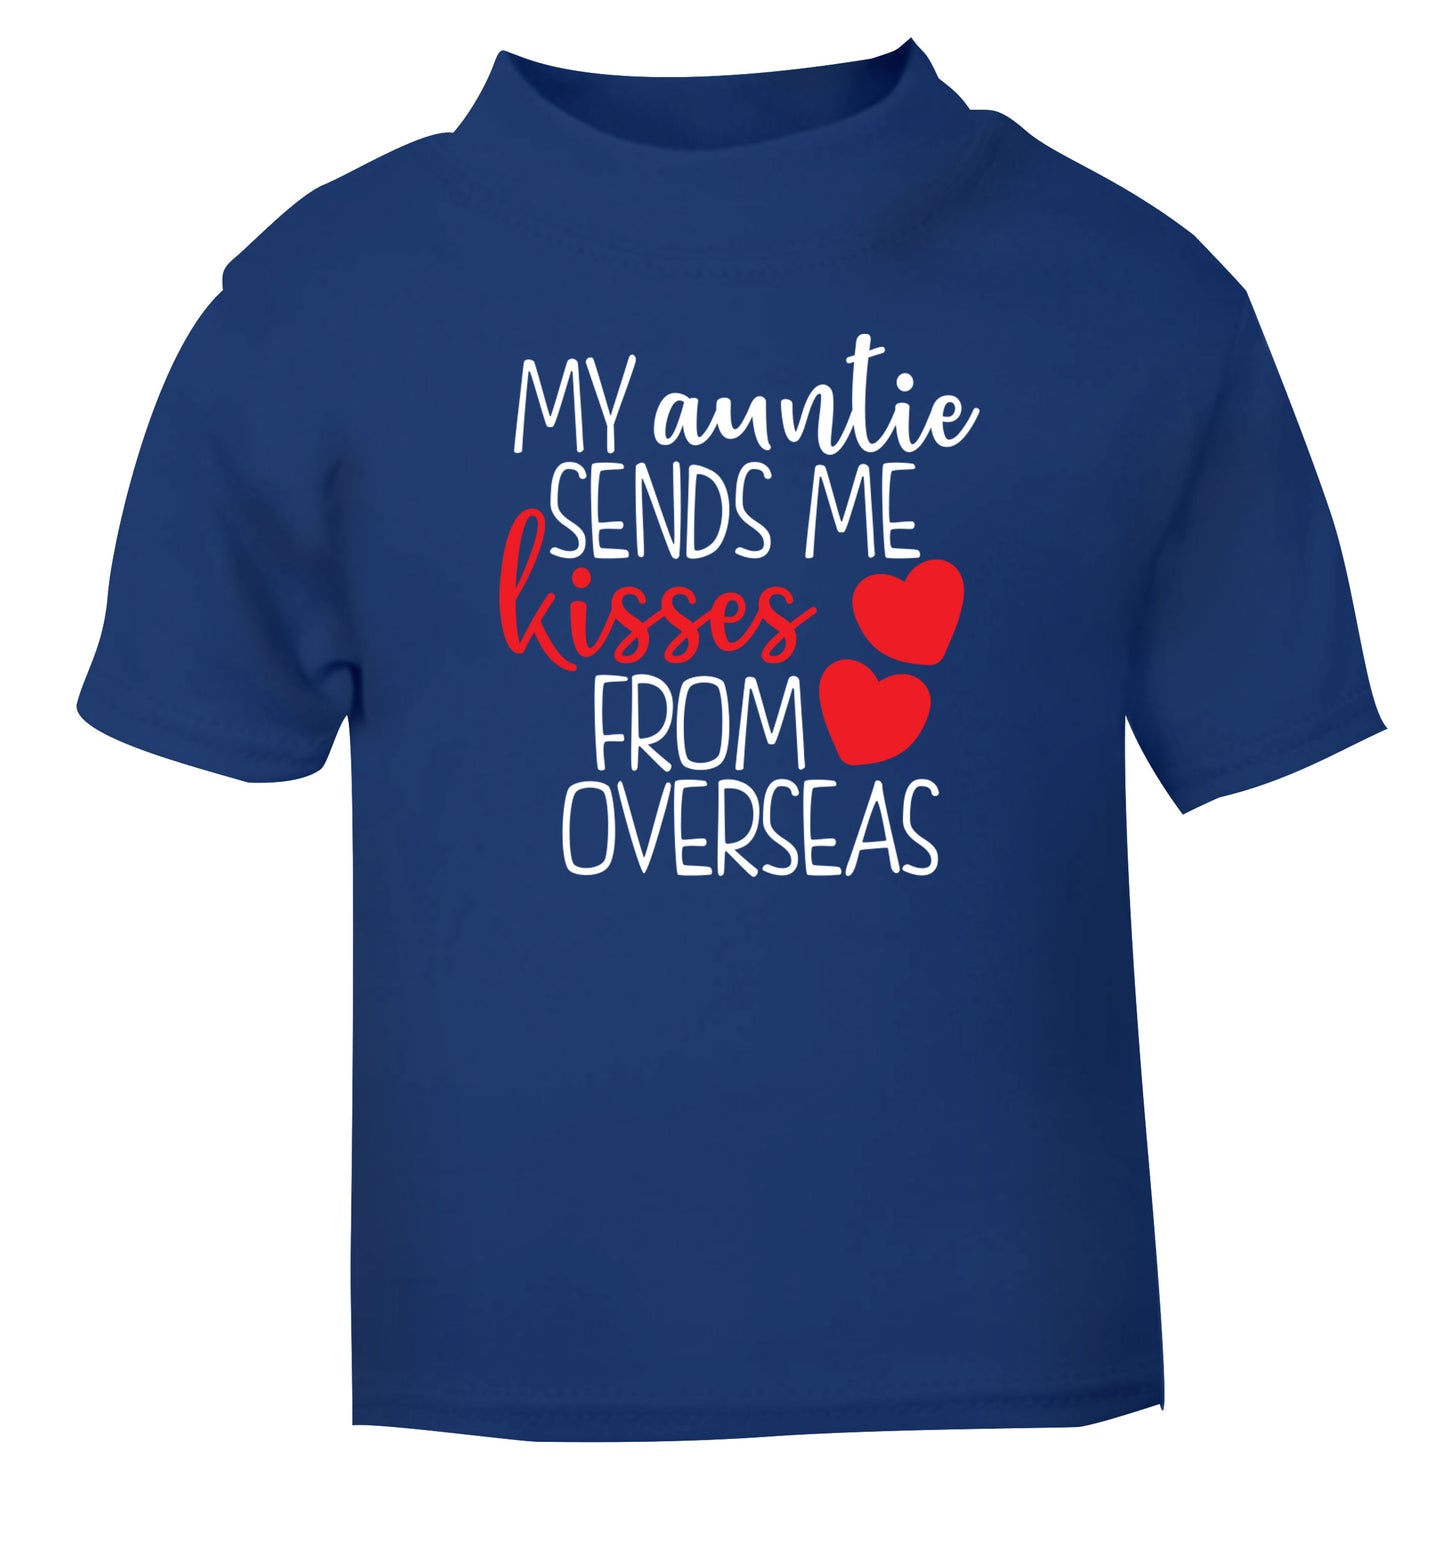 My auntie sends me kisses from overseas blue Baby Toddler Tshirt 2 Years